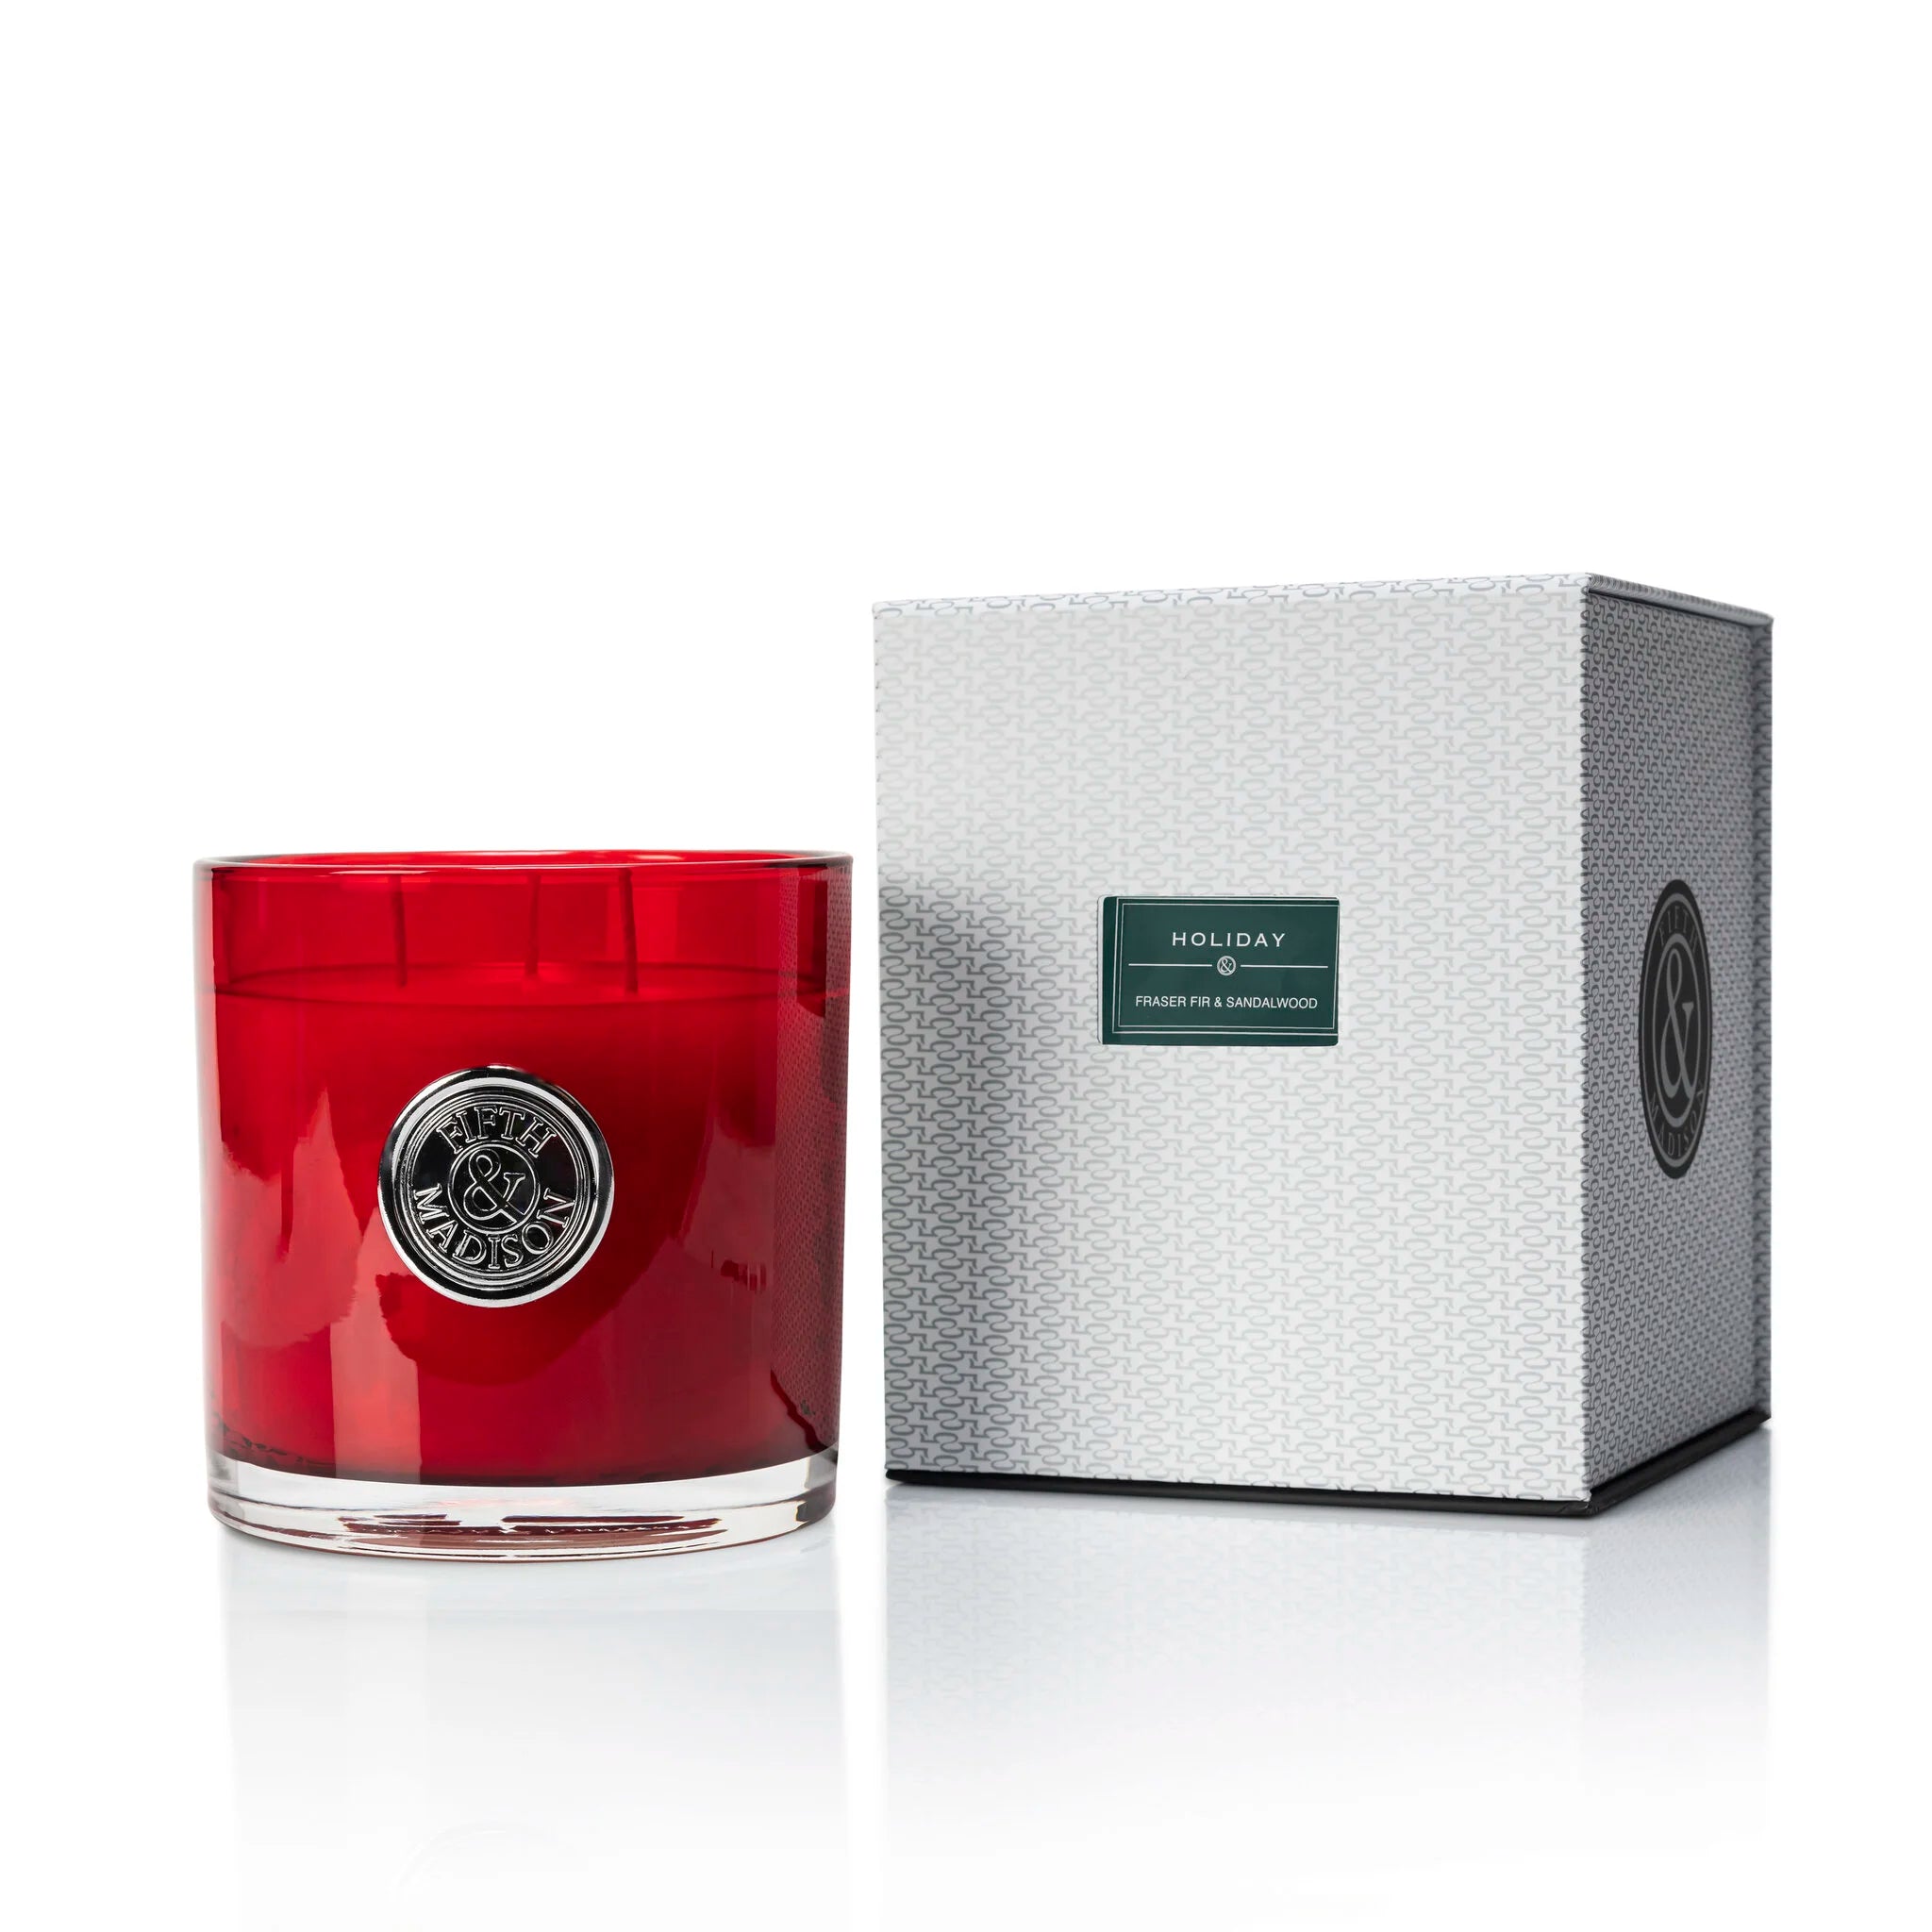 Holiday Gramercy Penthouse Triple Wick Candle